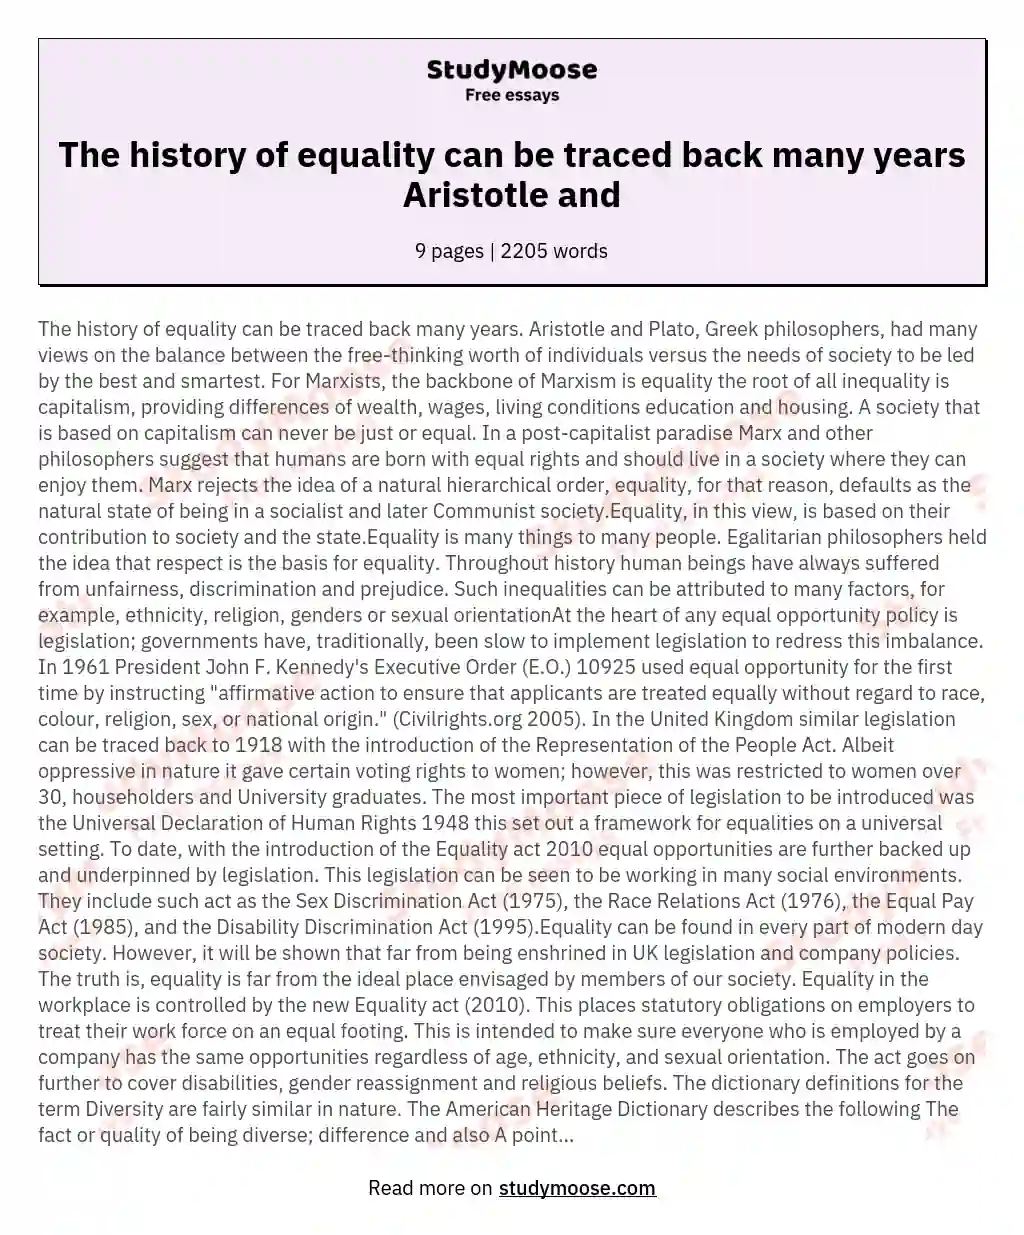 The history of equality can be traced back many years Aristotle and essay